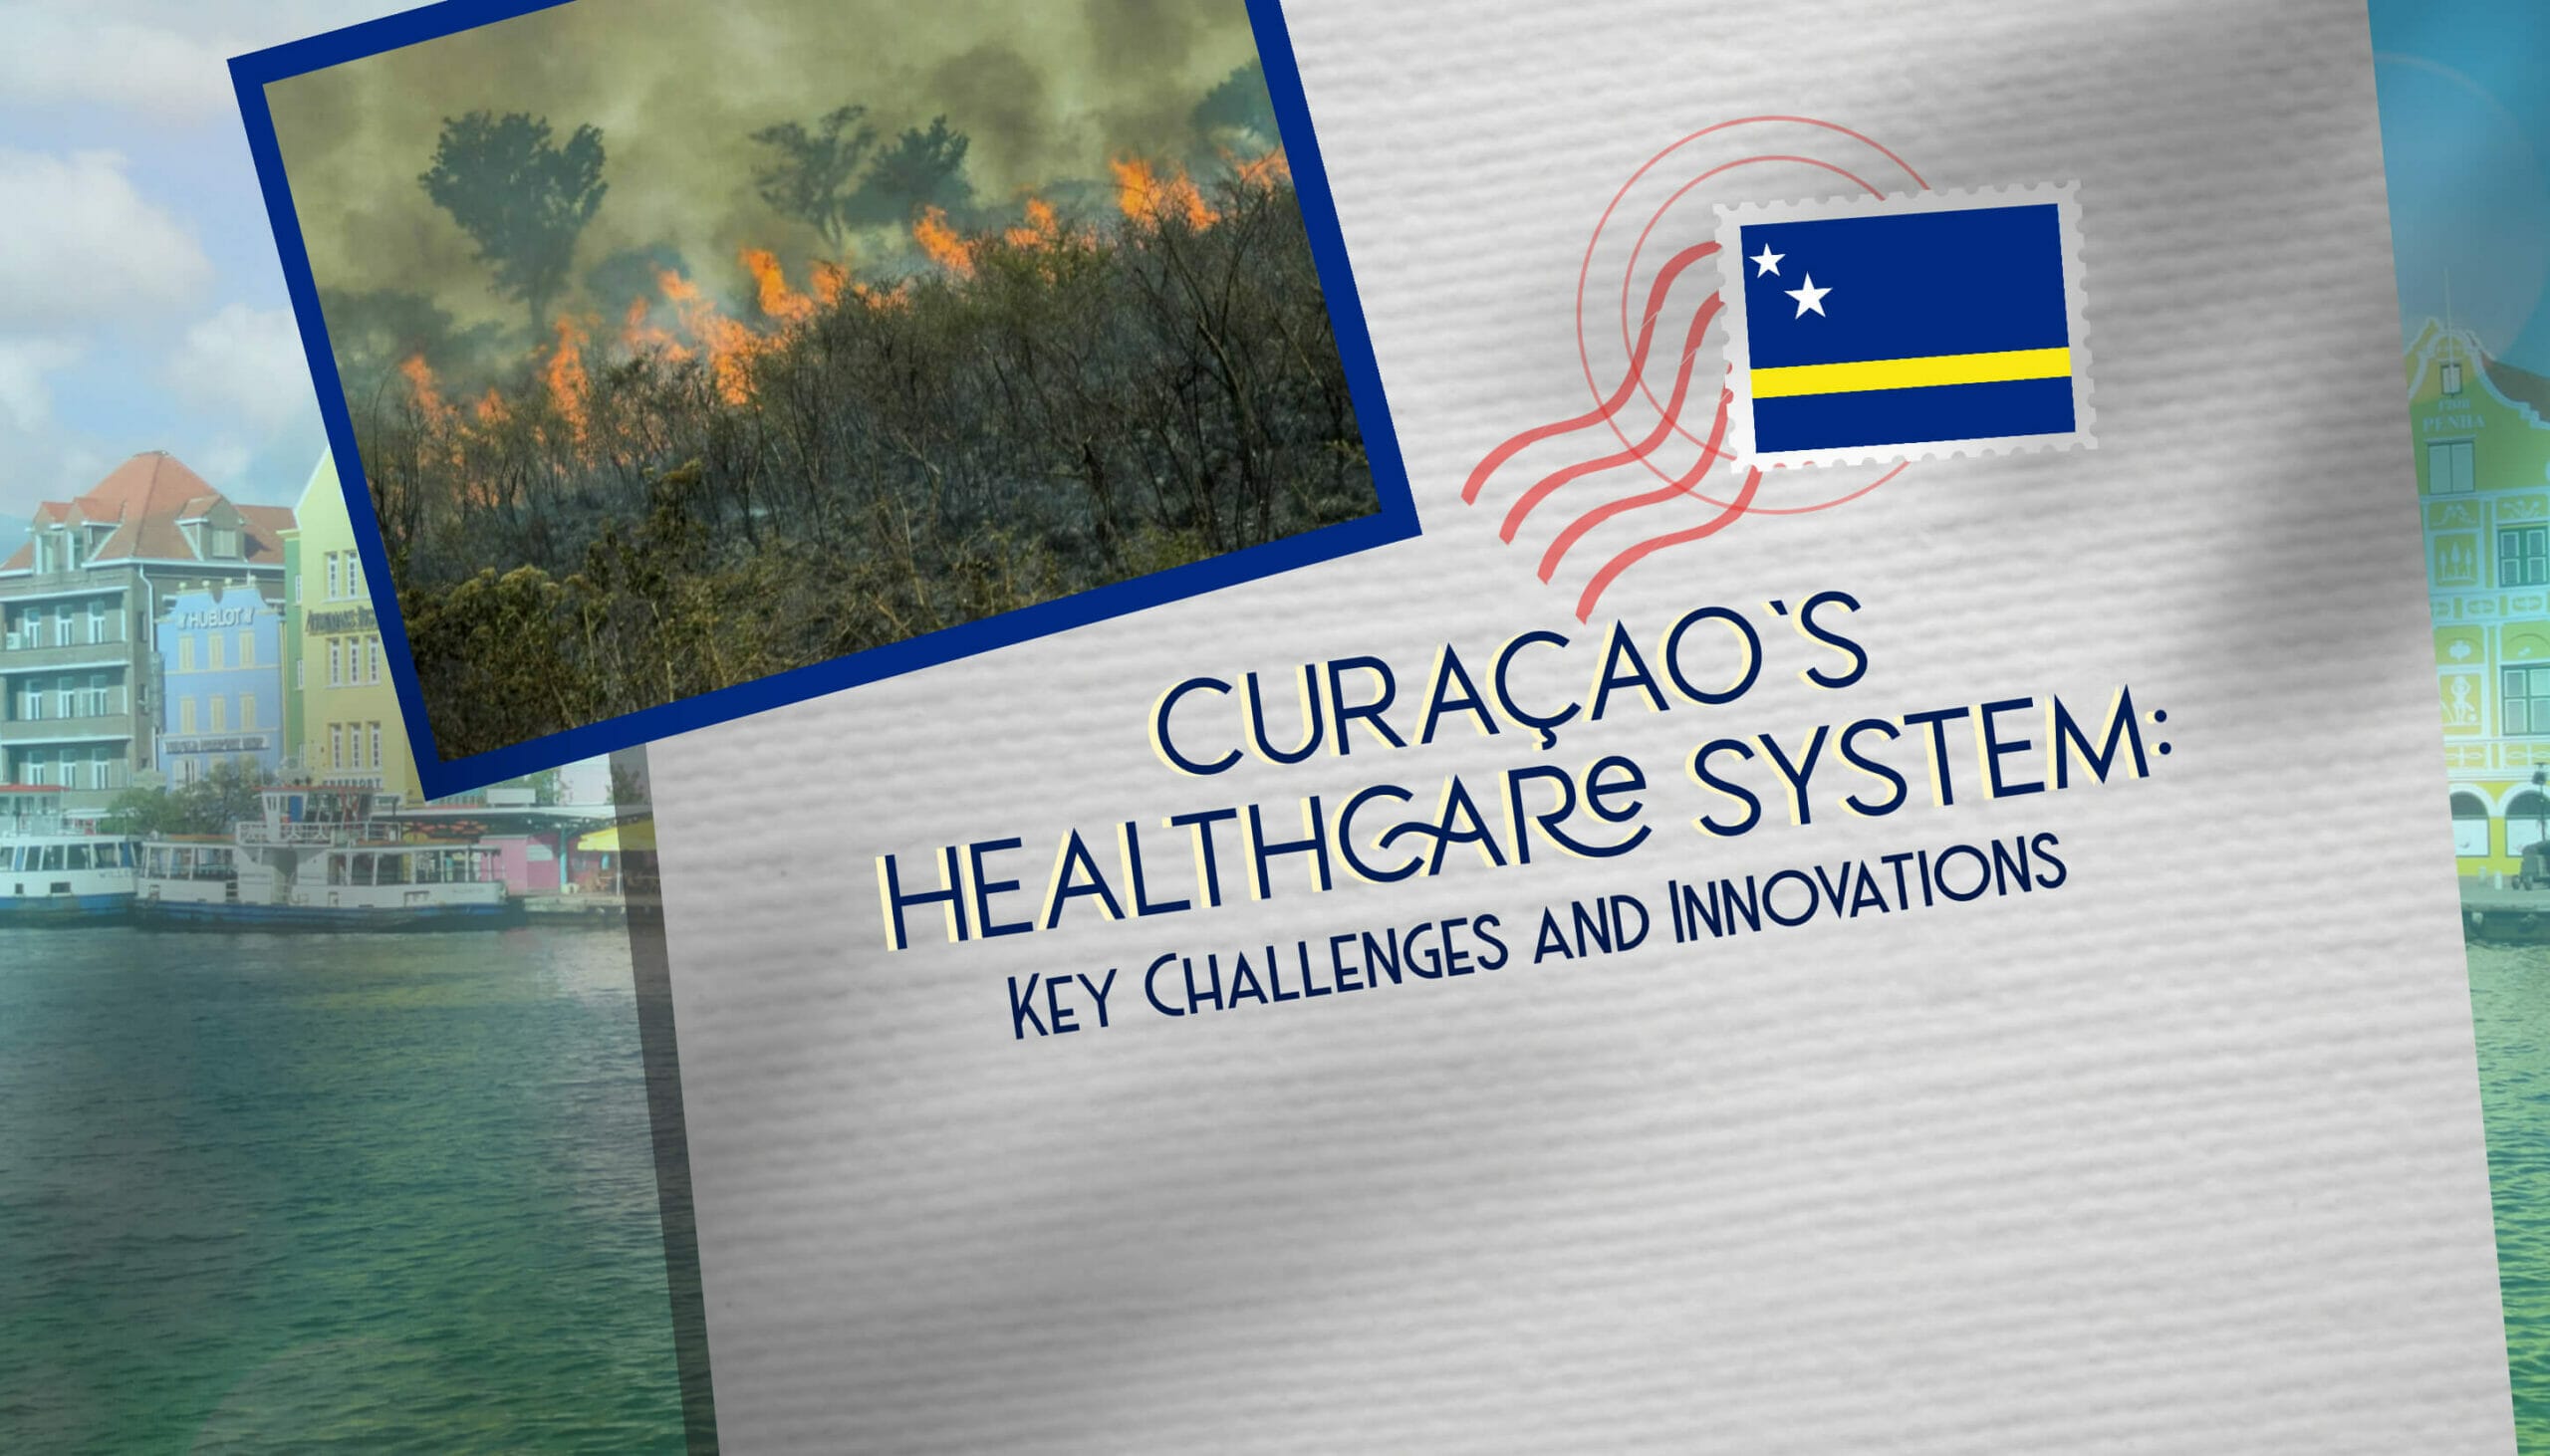 Curaçao's Healthcare System Key Challenges and Innovations